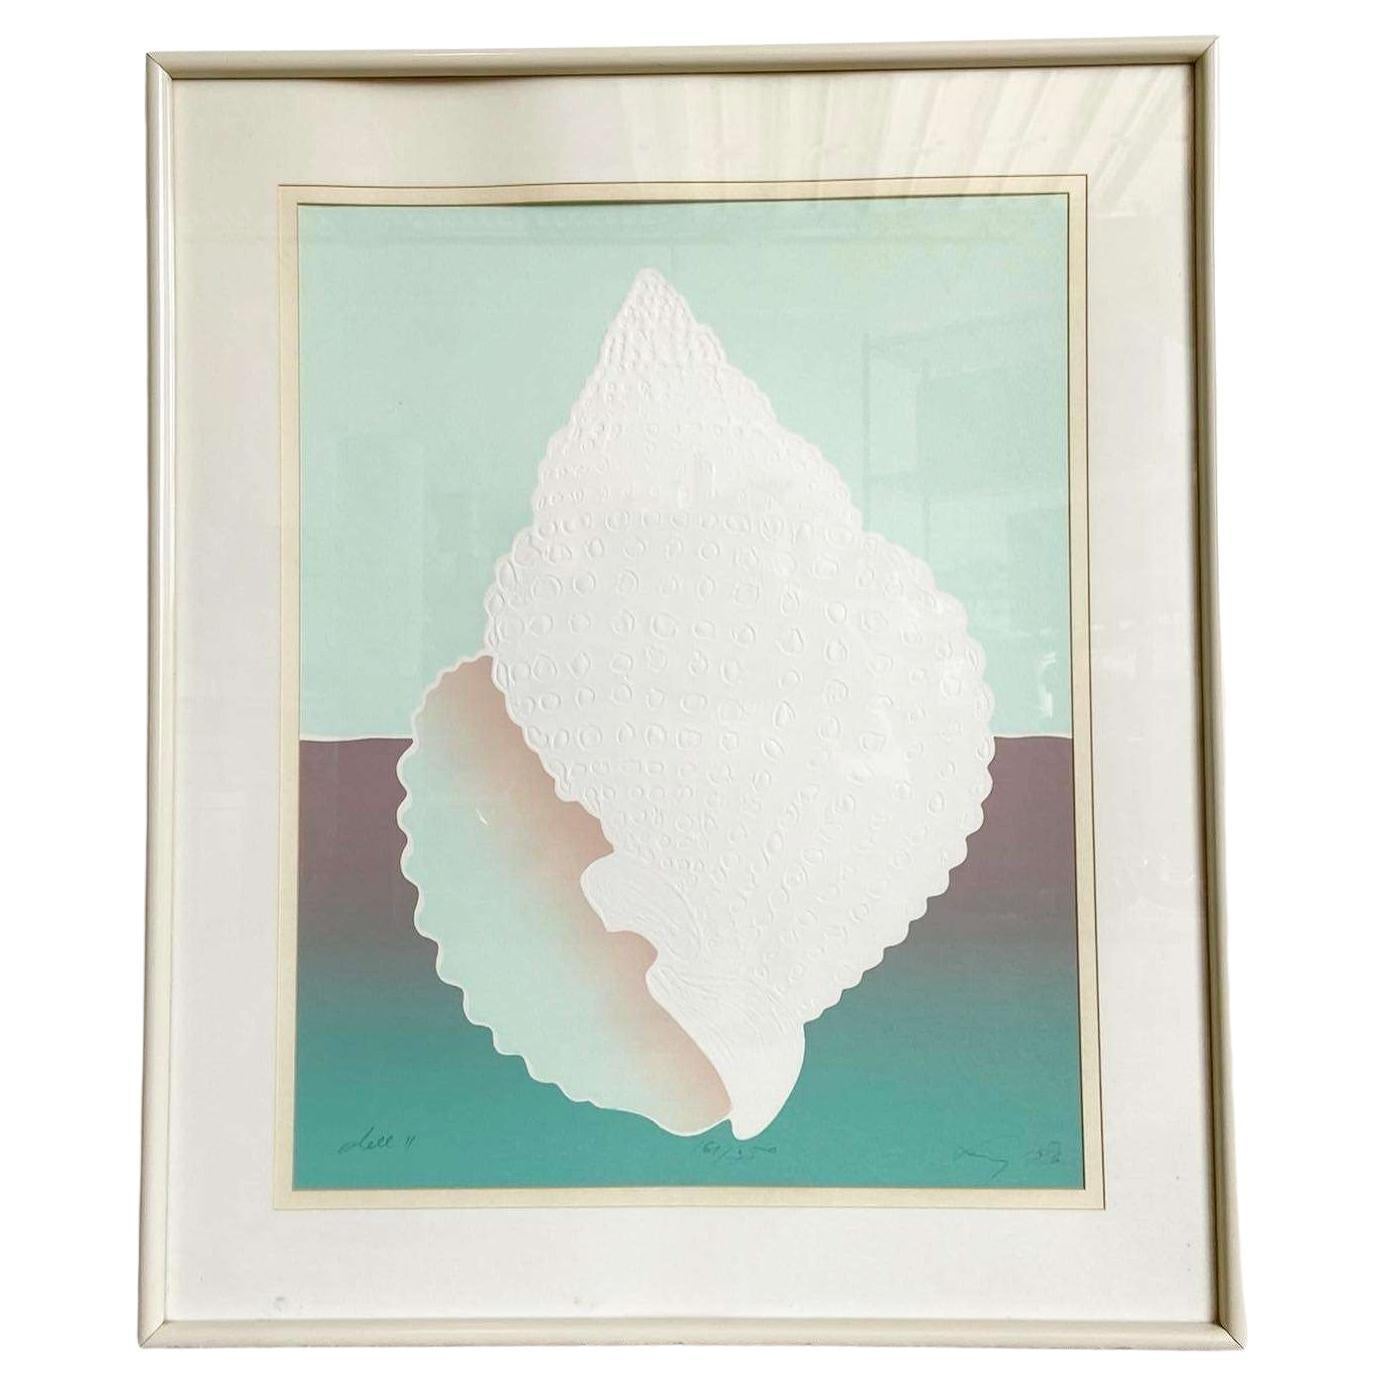 Postmodern Signed and Framed Lithograph Titled “Shell”